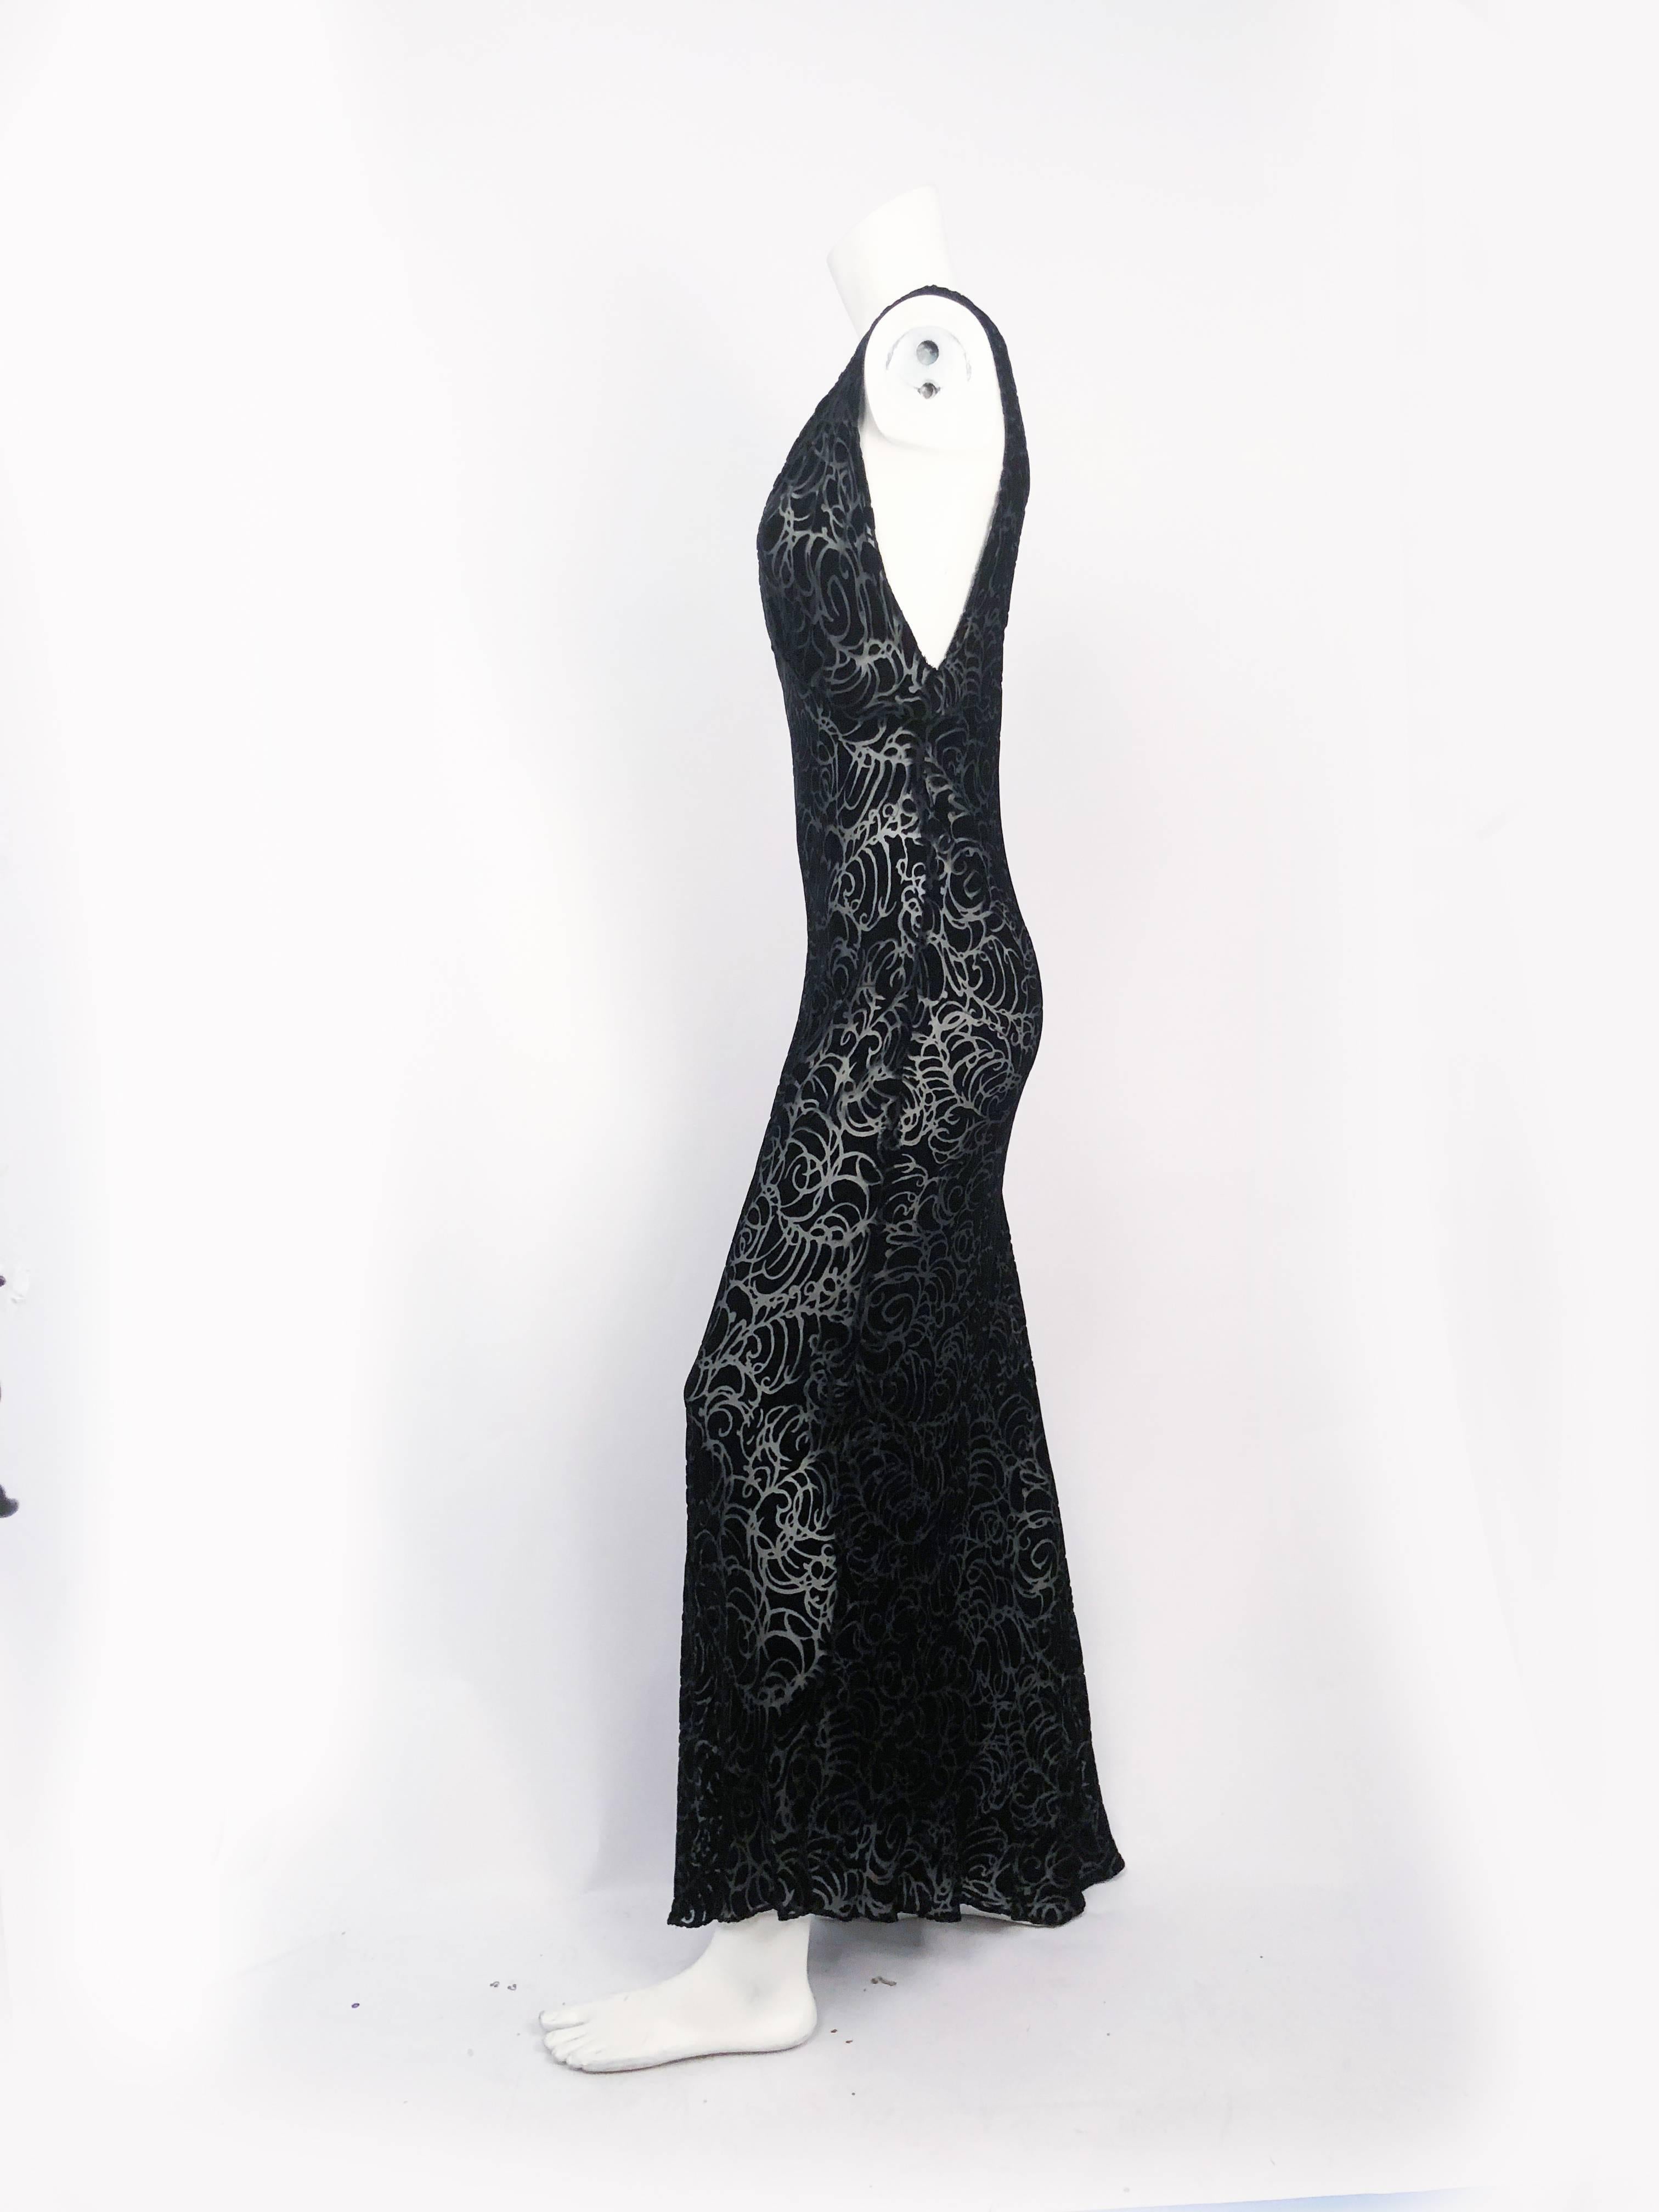 1930's Black Burnt Velvet Bias-cut Evening Gown. Black bias-cut evening dress with black burnout deco-pattern velvet. Ruching at the top of each shoulder strap that are 2 inches wide. 